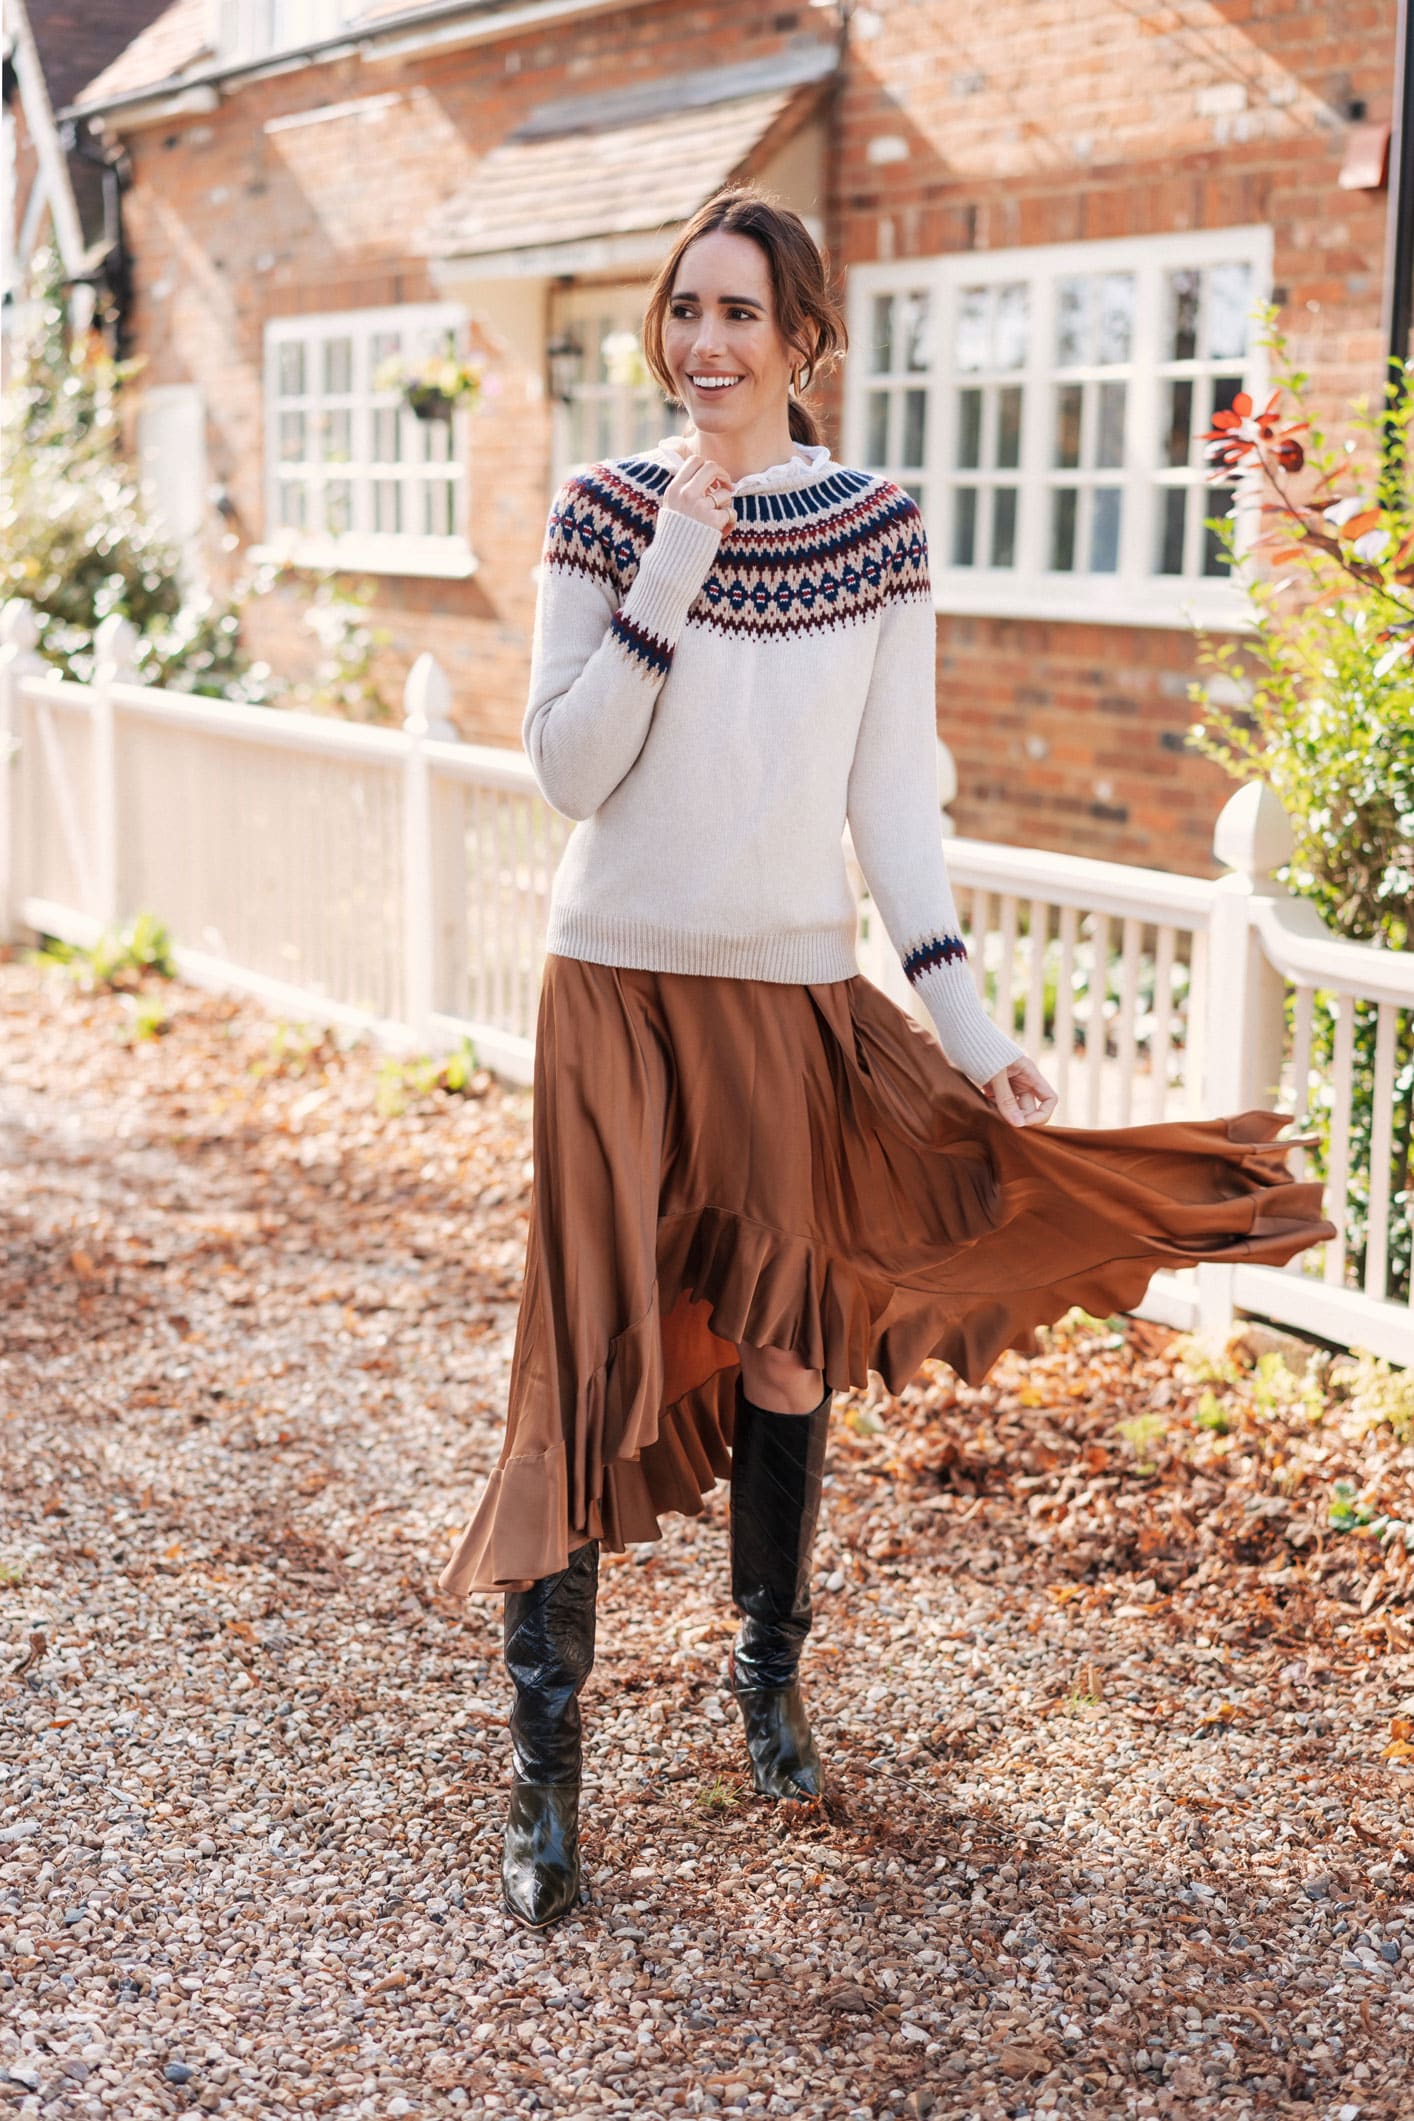 Louise Roe of Front Roe shops for fair isle jumpers